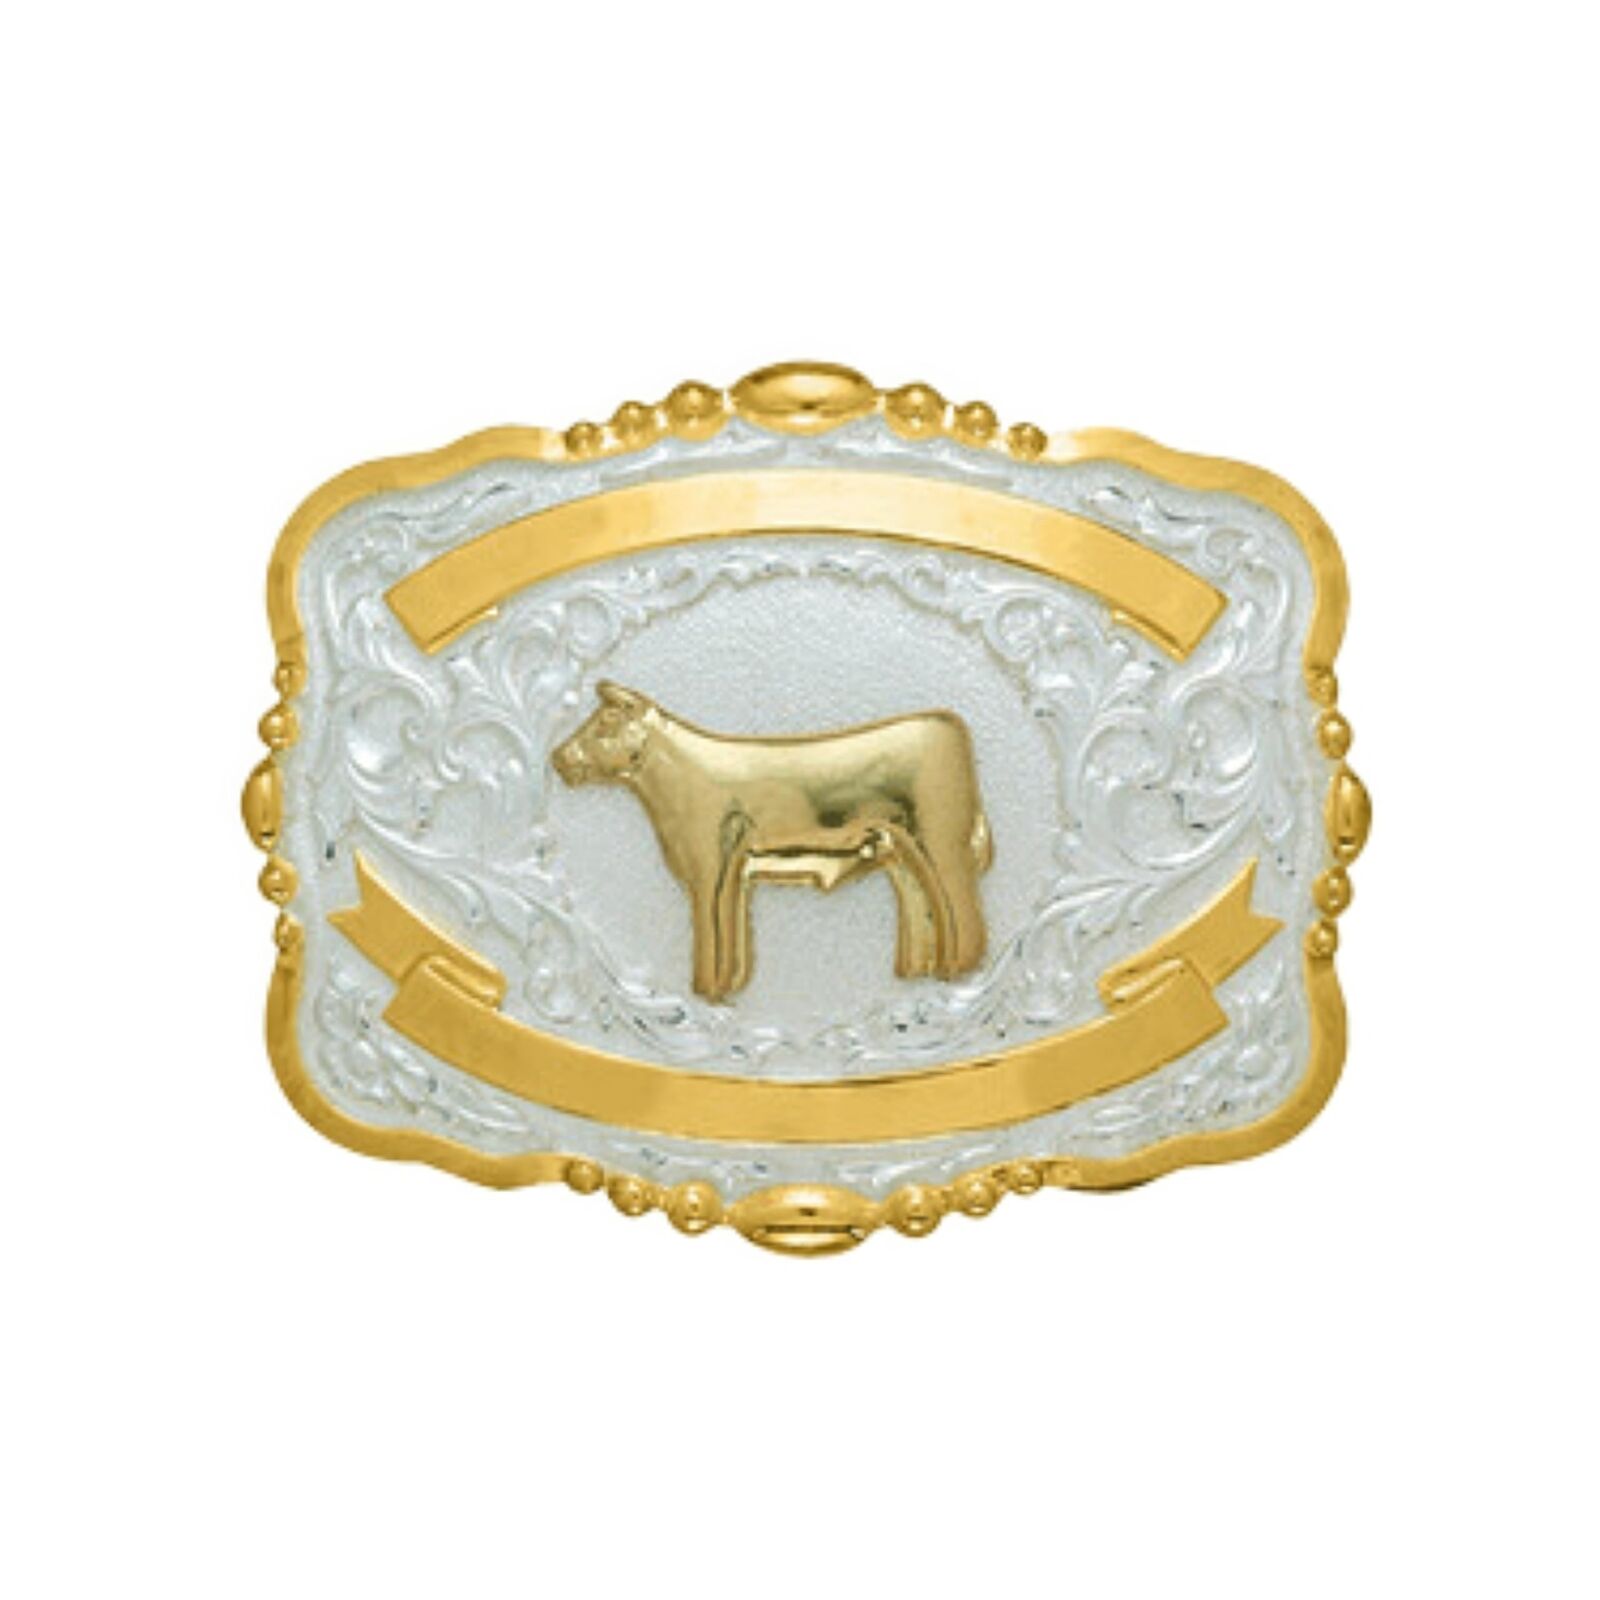 Crumrine Lighting Ridge Show Cow Trophy Buckle with Engravable Ribbons (Small)